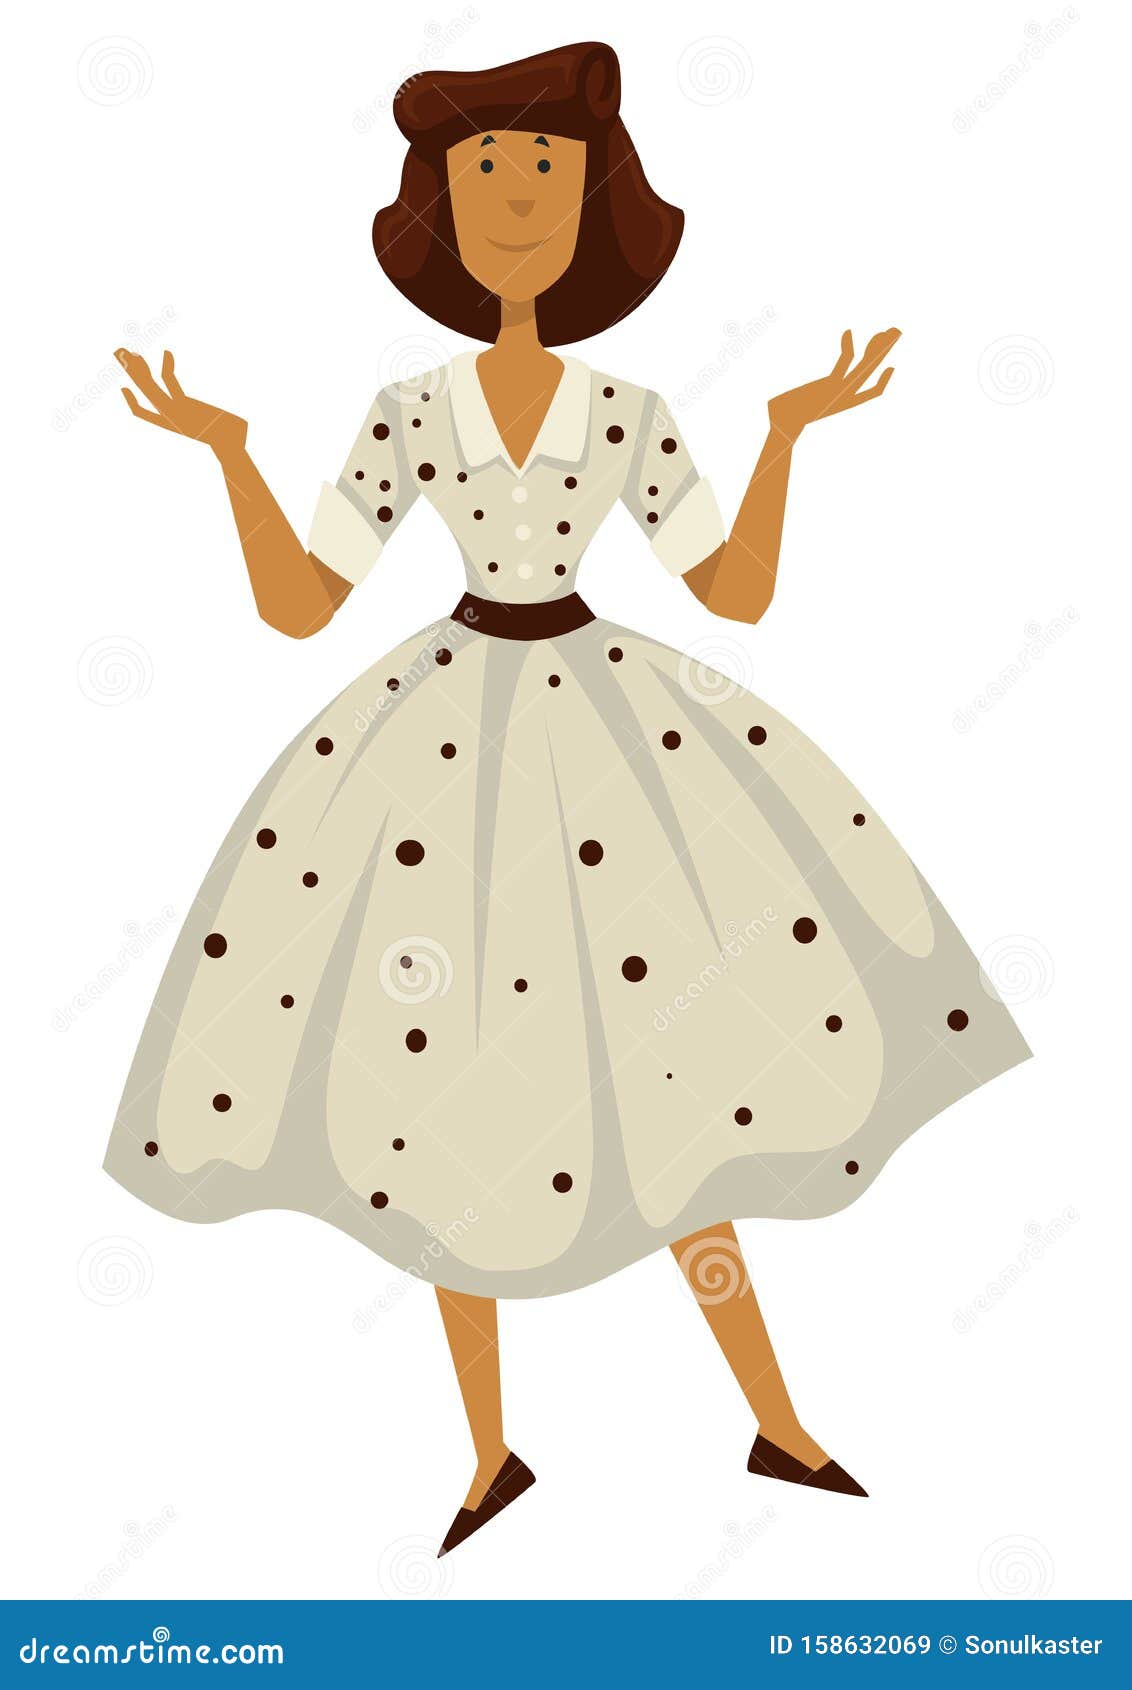 https://thumbs.dreamstime.com/z/s-style-woman-polkadot-dress-retro-fashion-vector-female-characters-vintage-clothes-hairstyle-poodle-skirt-clothing-design-158632069.jpg